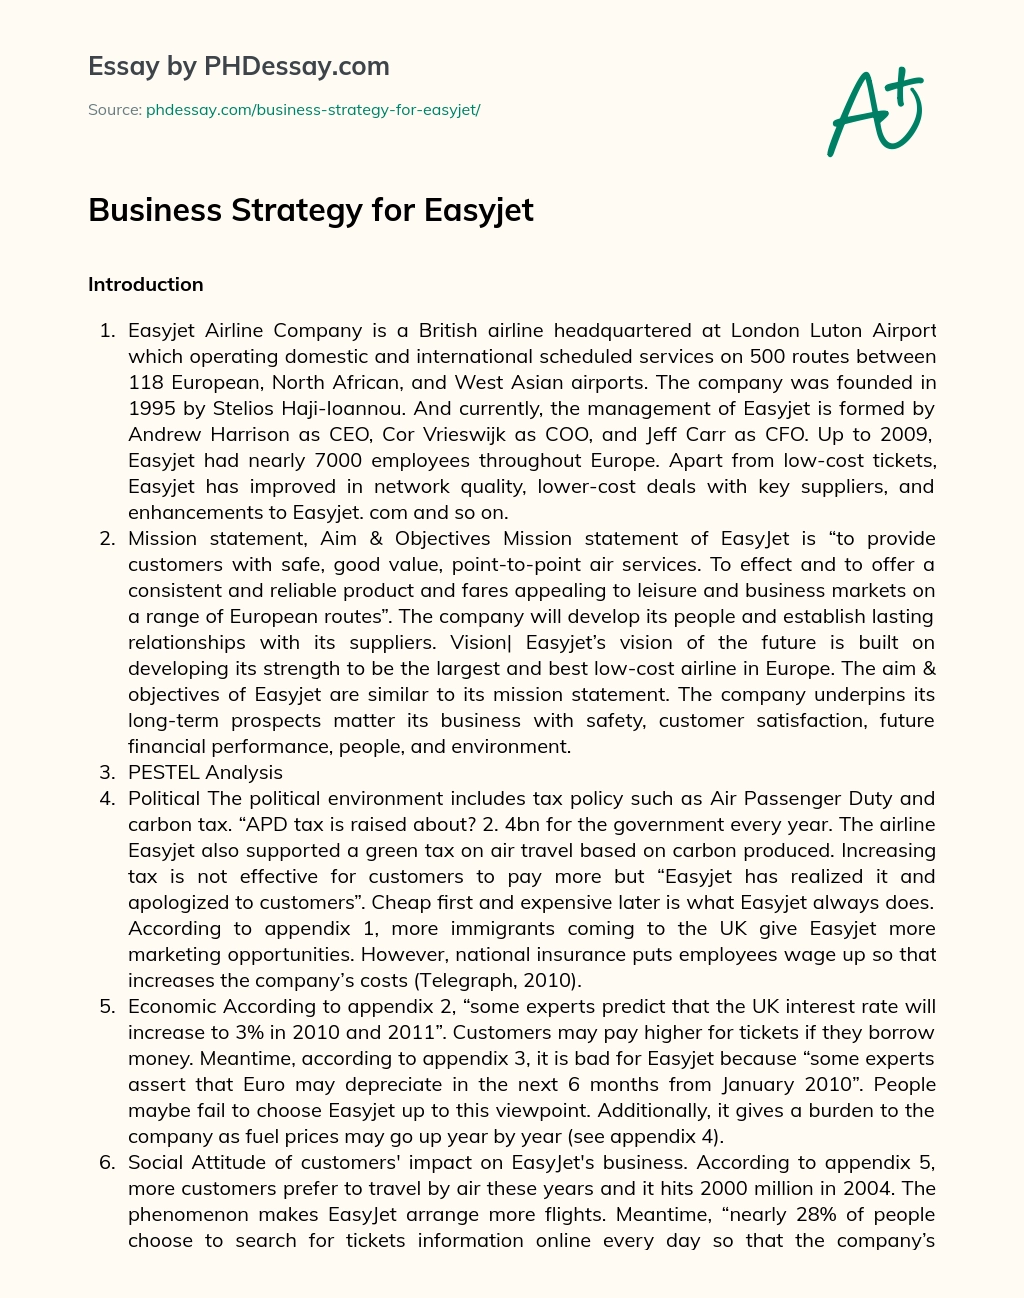 Business Strategy for Easyjet essay